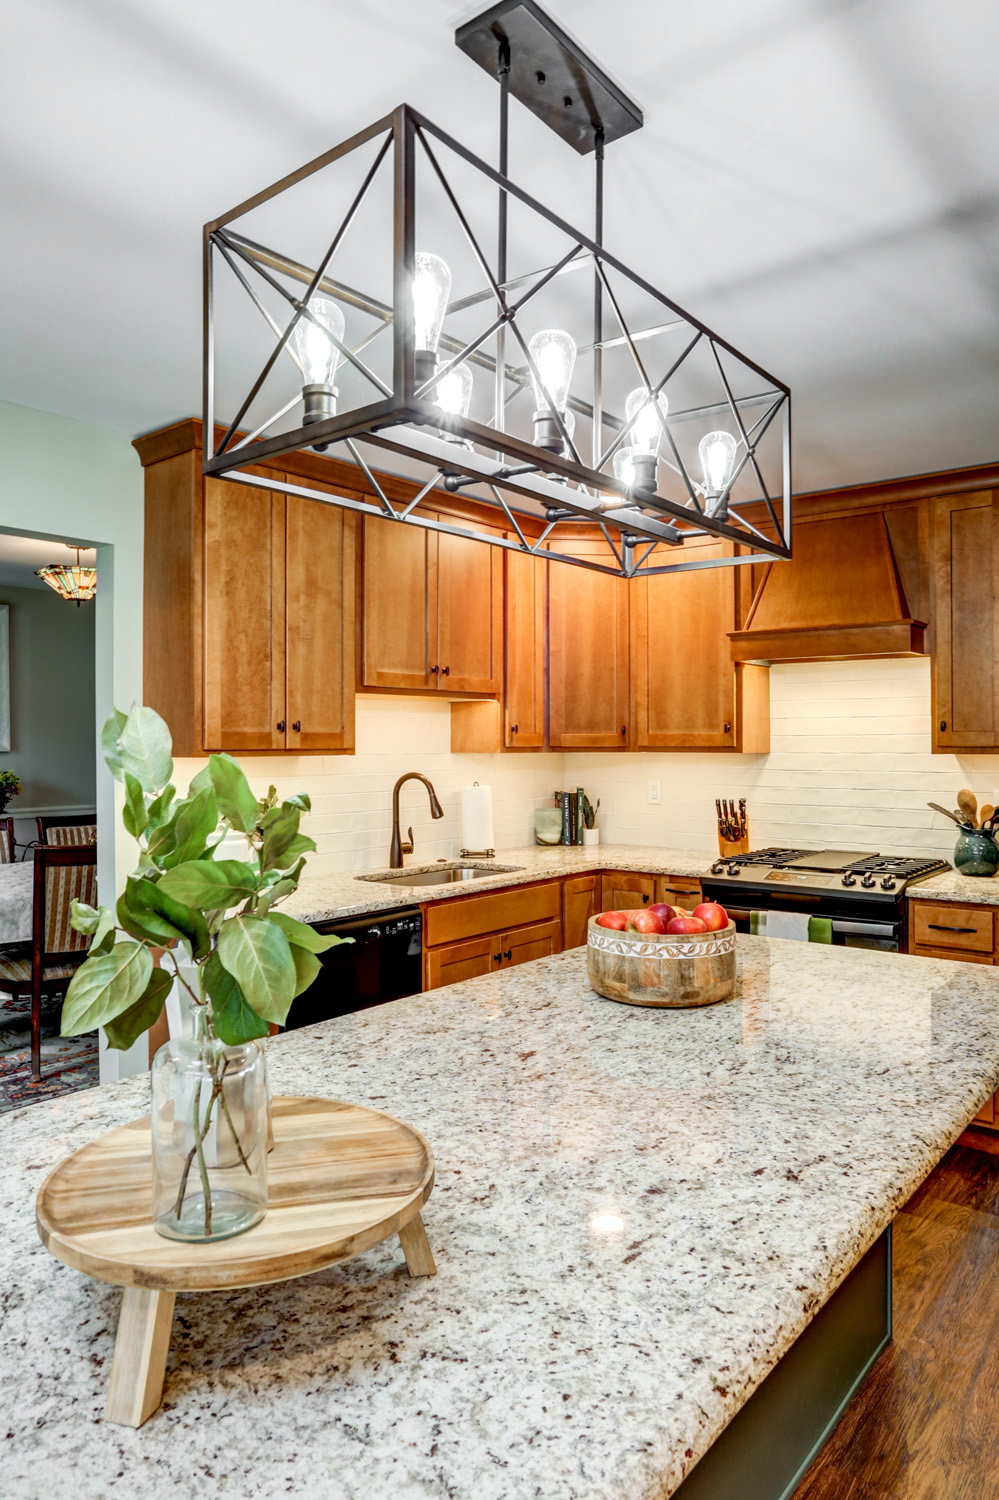 Hempfield Kitchen Remodel with large pendant light